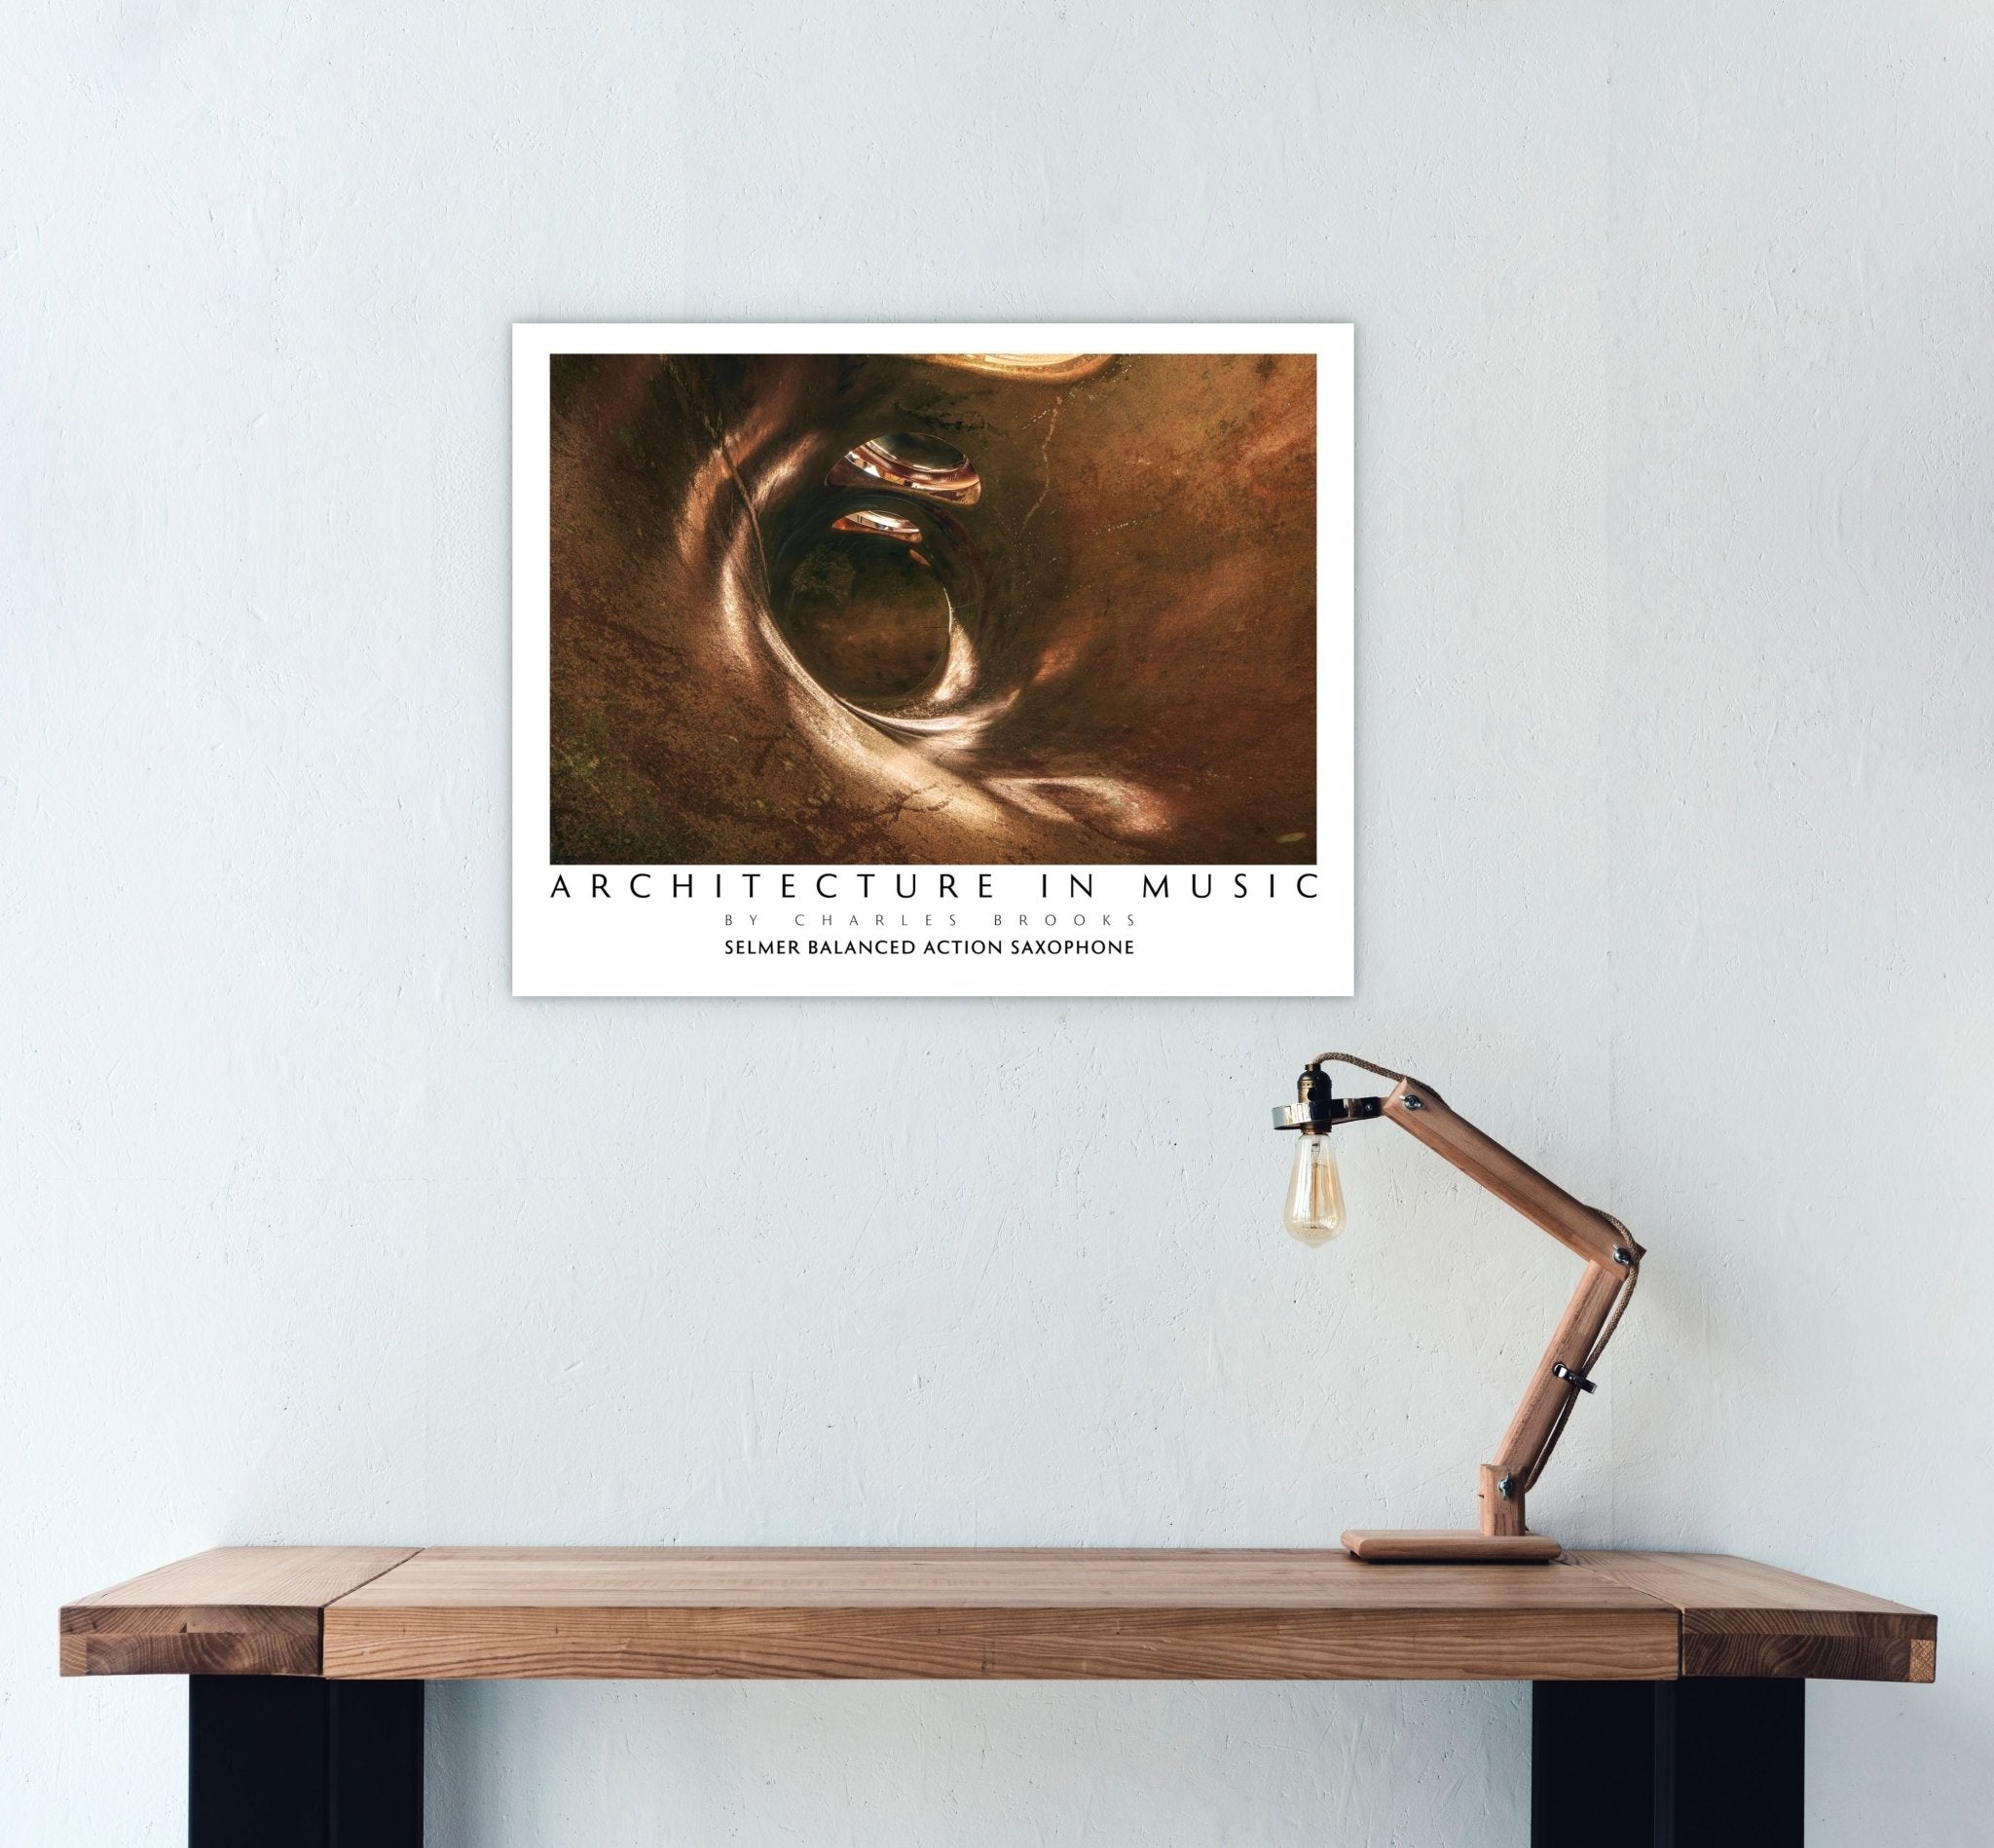 Photo of 1940s Selmer Balanced Action Saxophone. High Quality Poster. - Giclée Poster Print - Architecture In Music